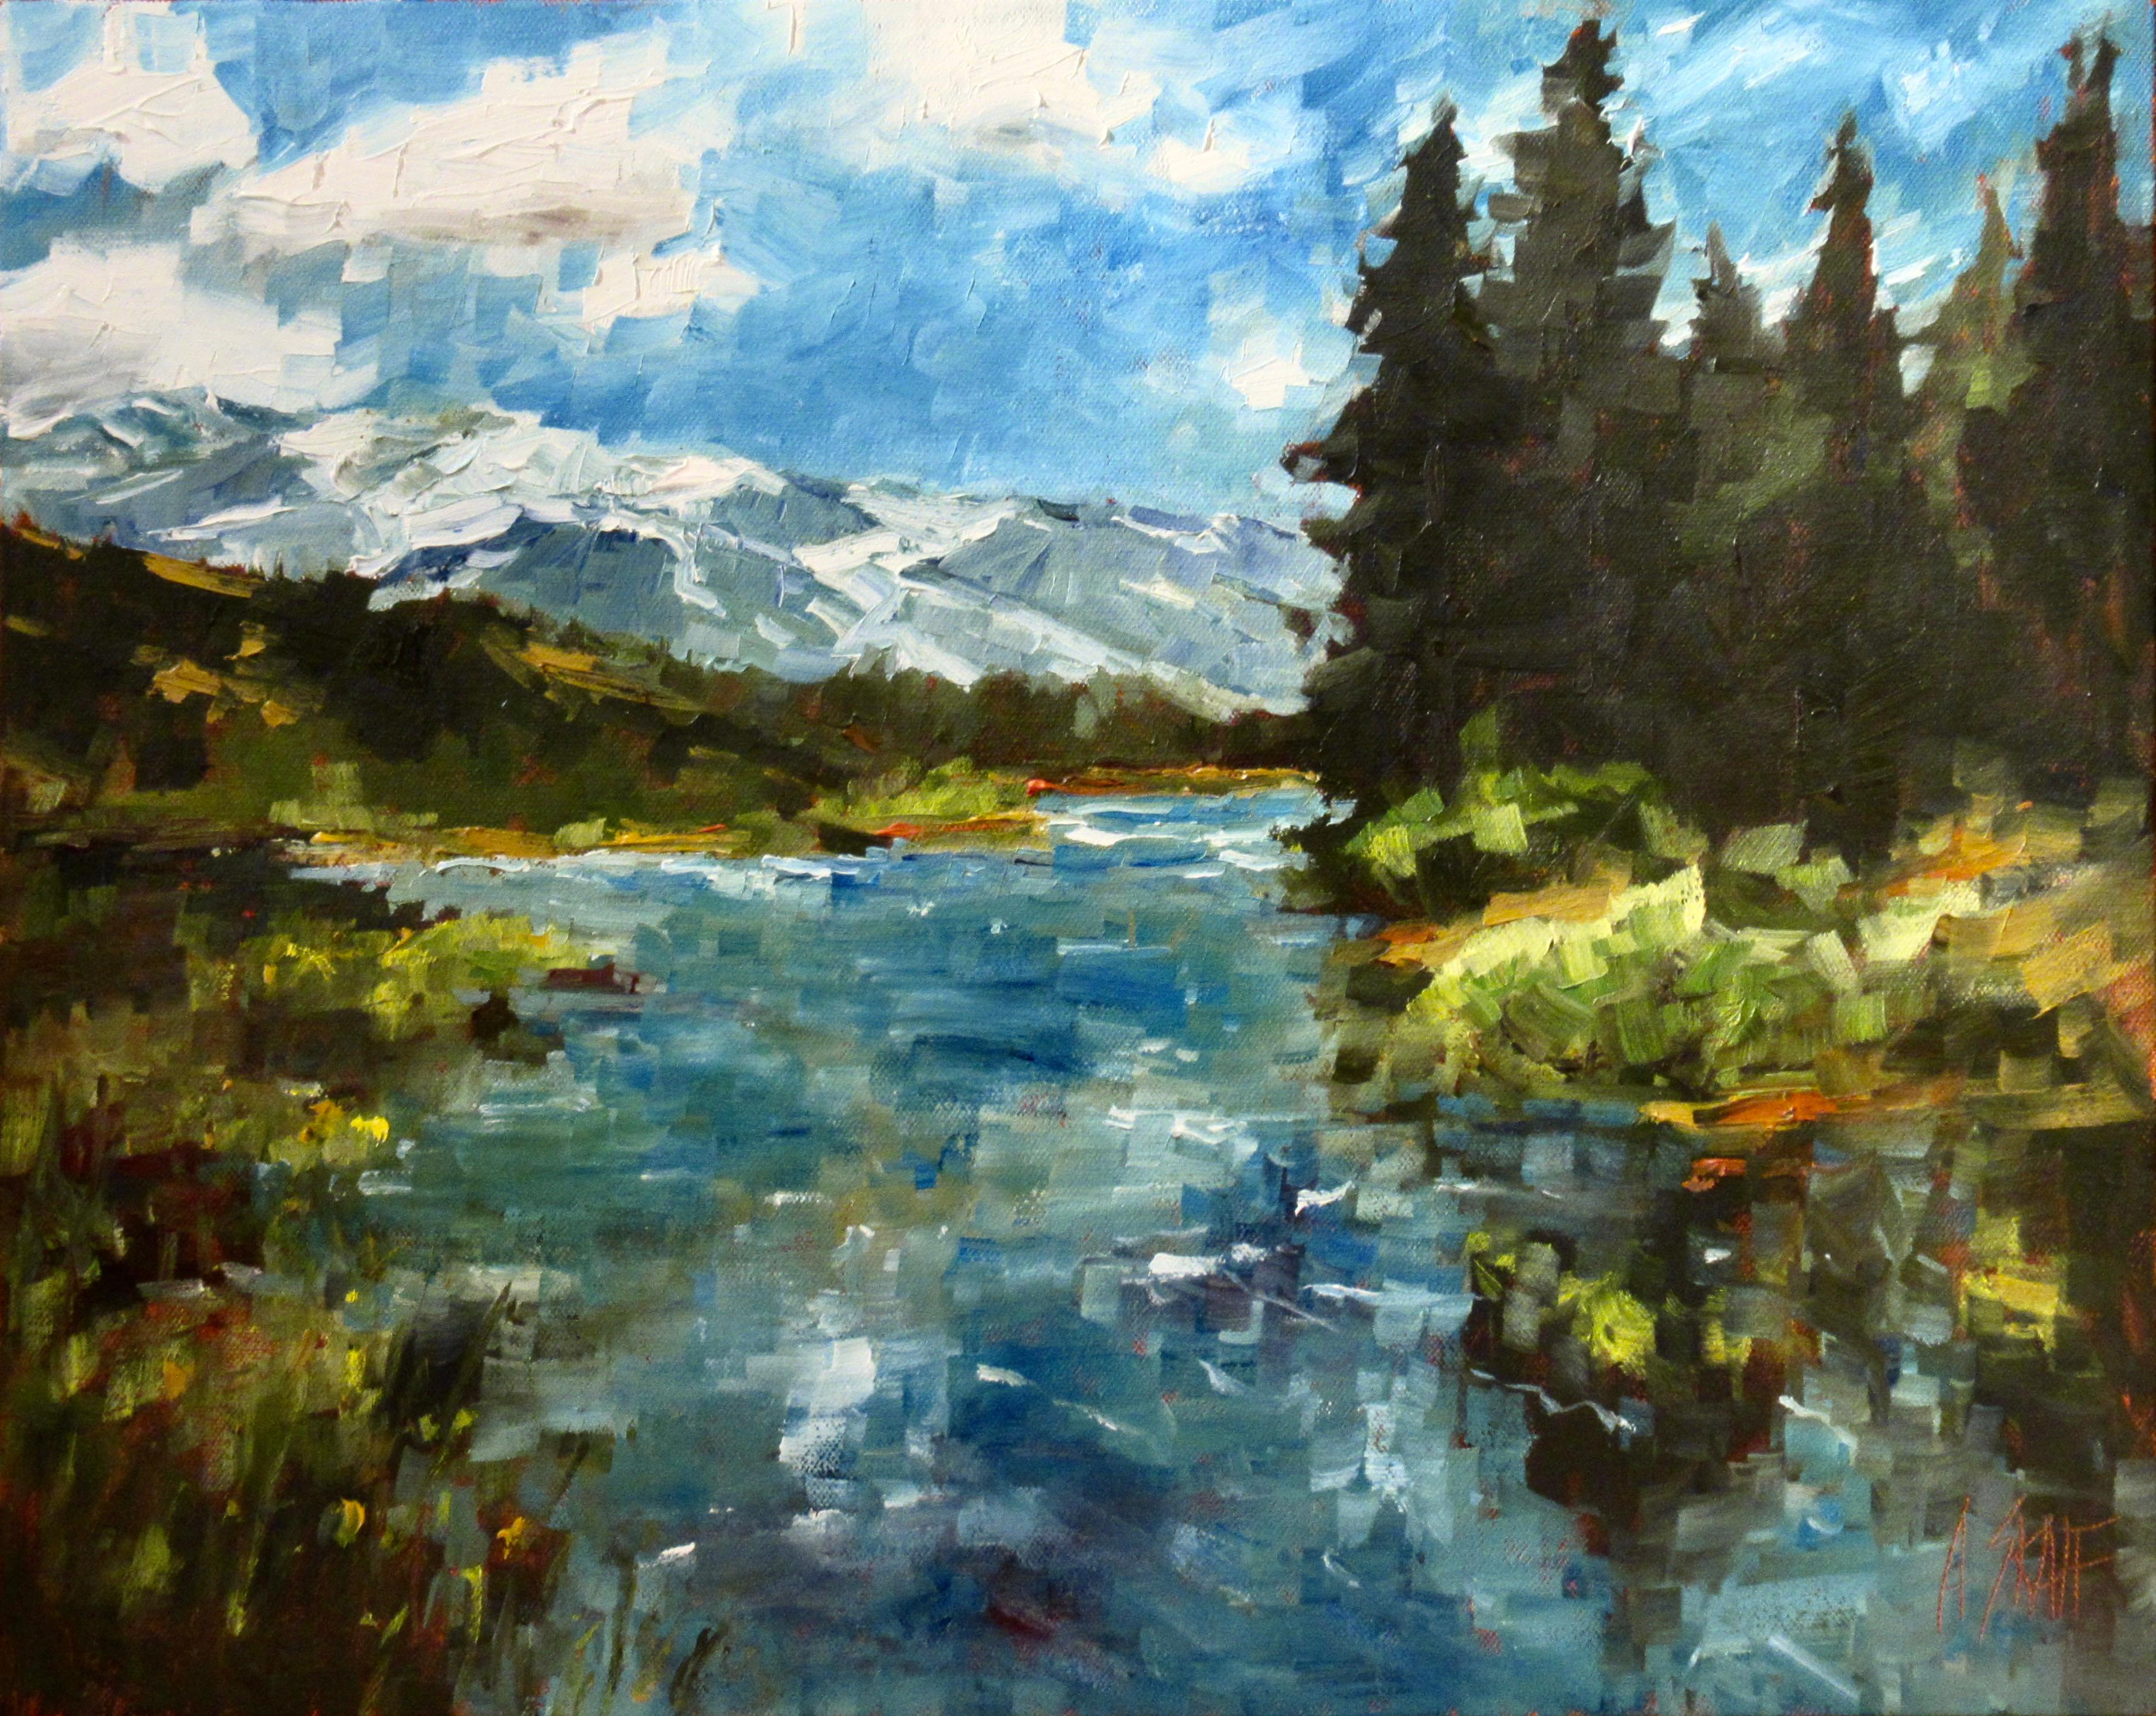 Spring Flow on the Little Truckee - Painting by Andrew (Andy) Skaff